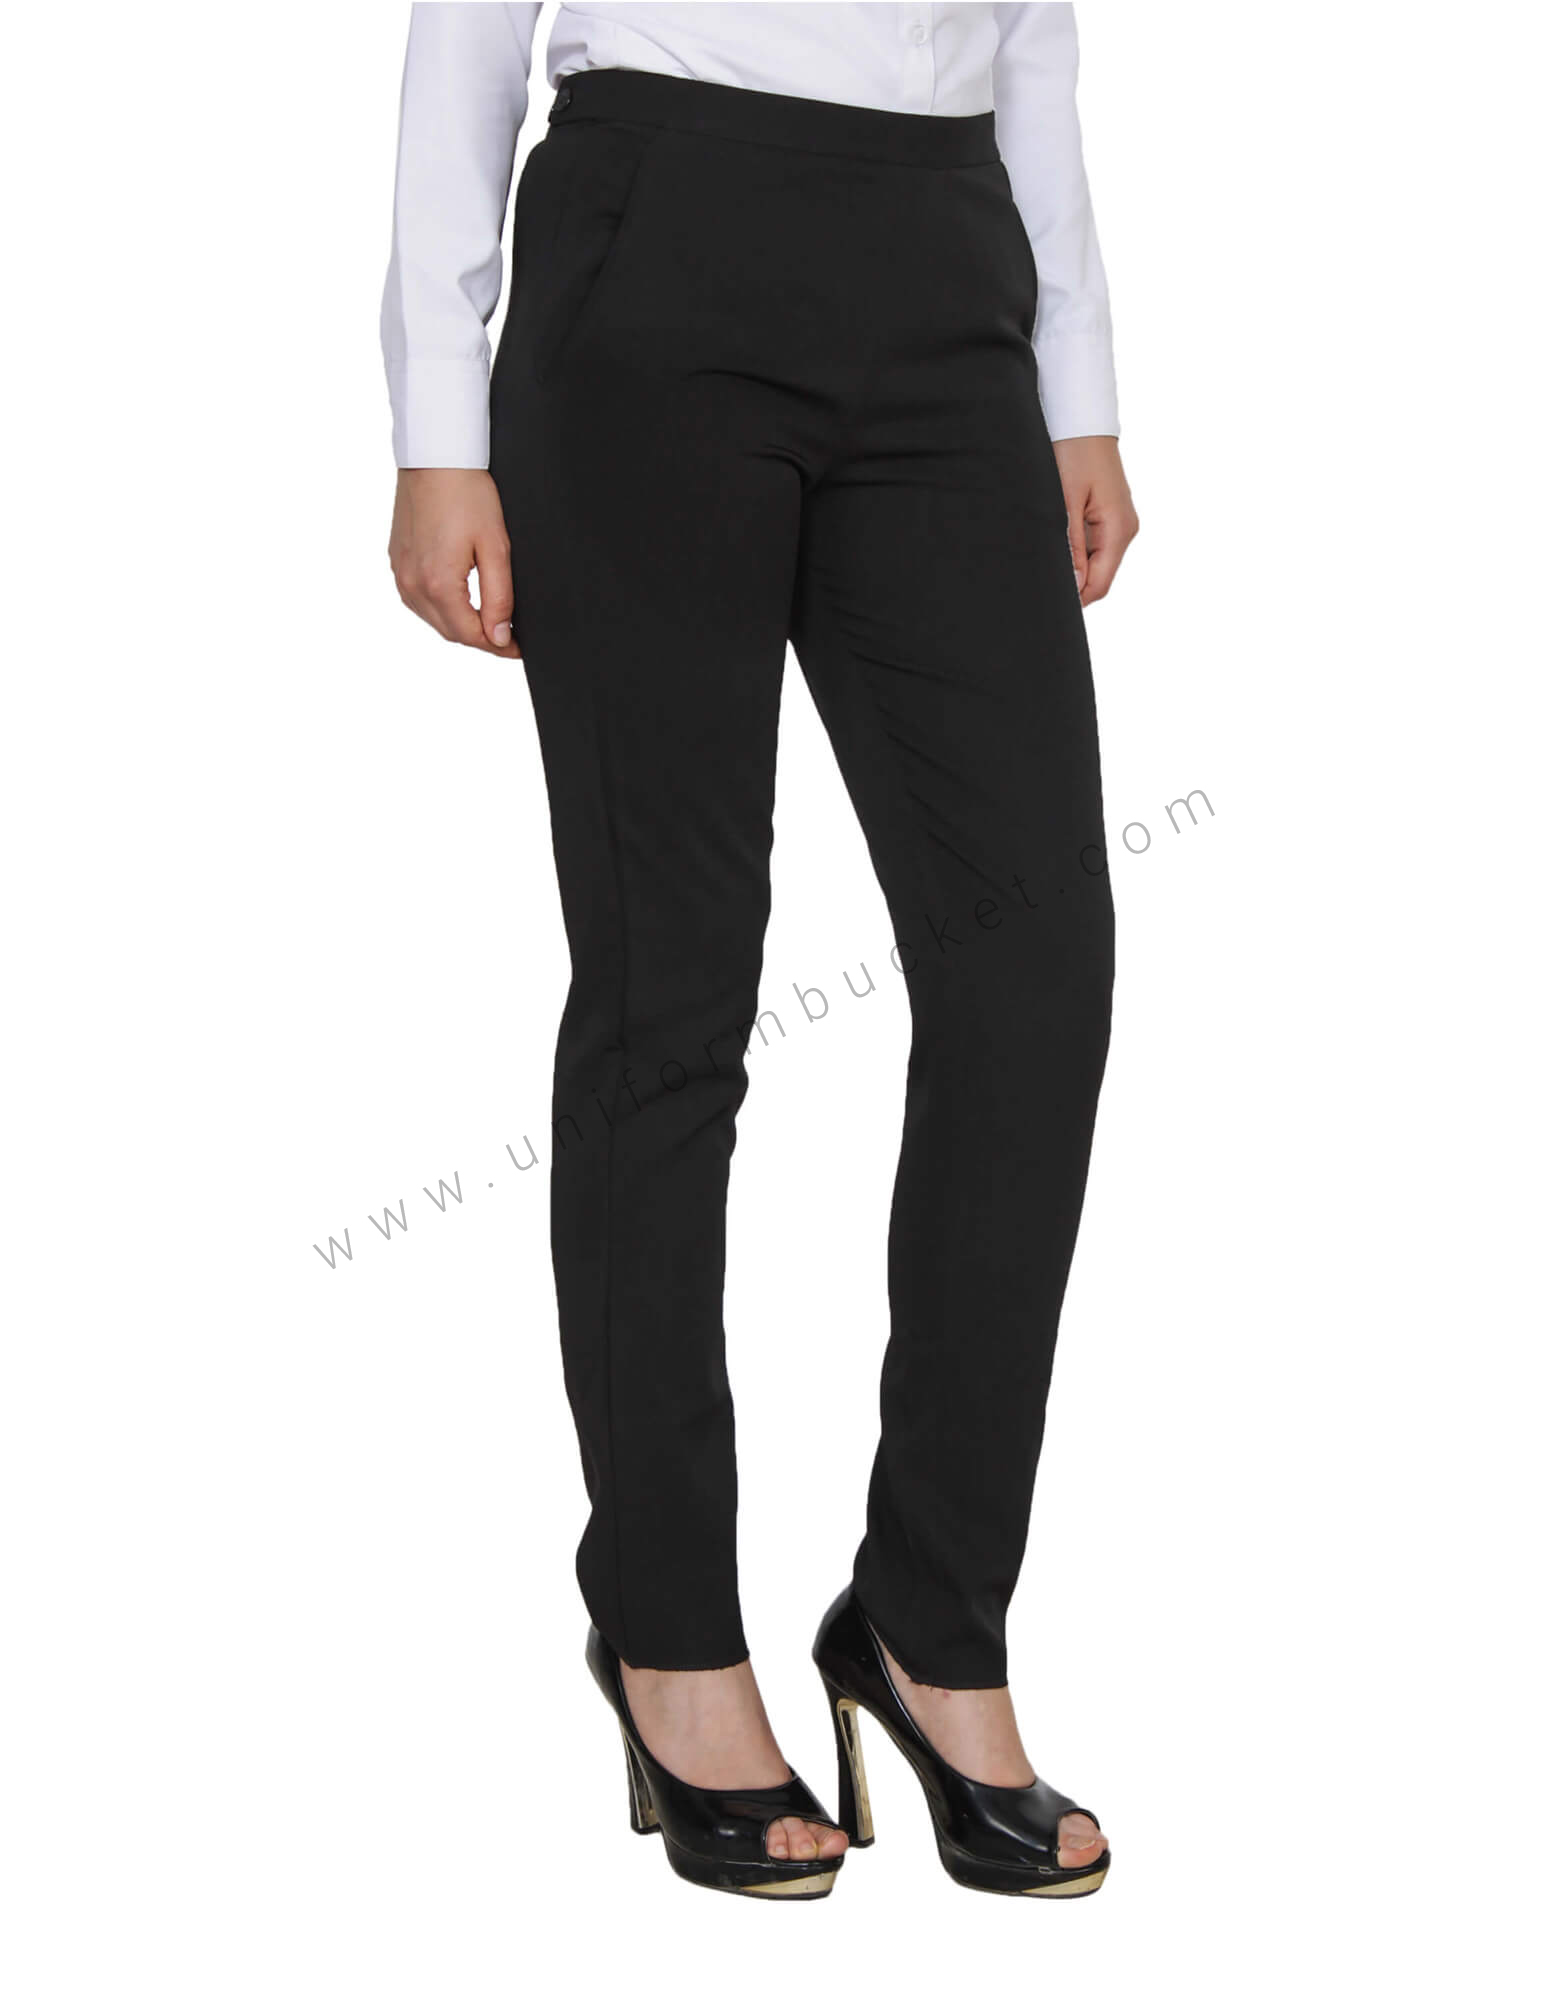 Buy Regular Fit Men Trousers Blue and Black Combo of 2 Polyester Blend for  Best Price Reviews Free Shipping